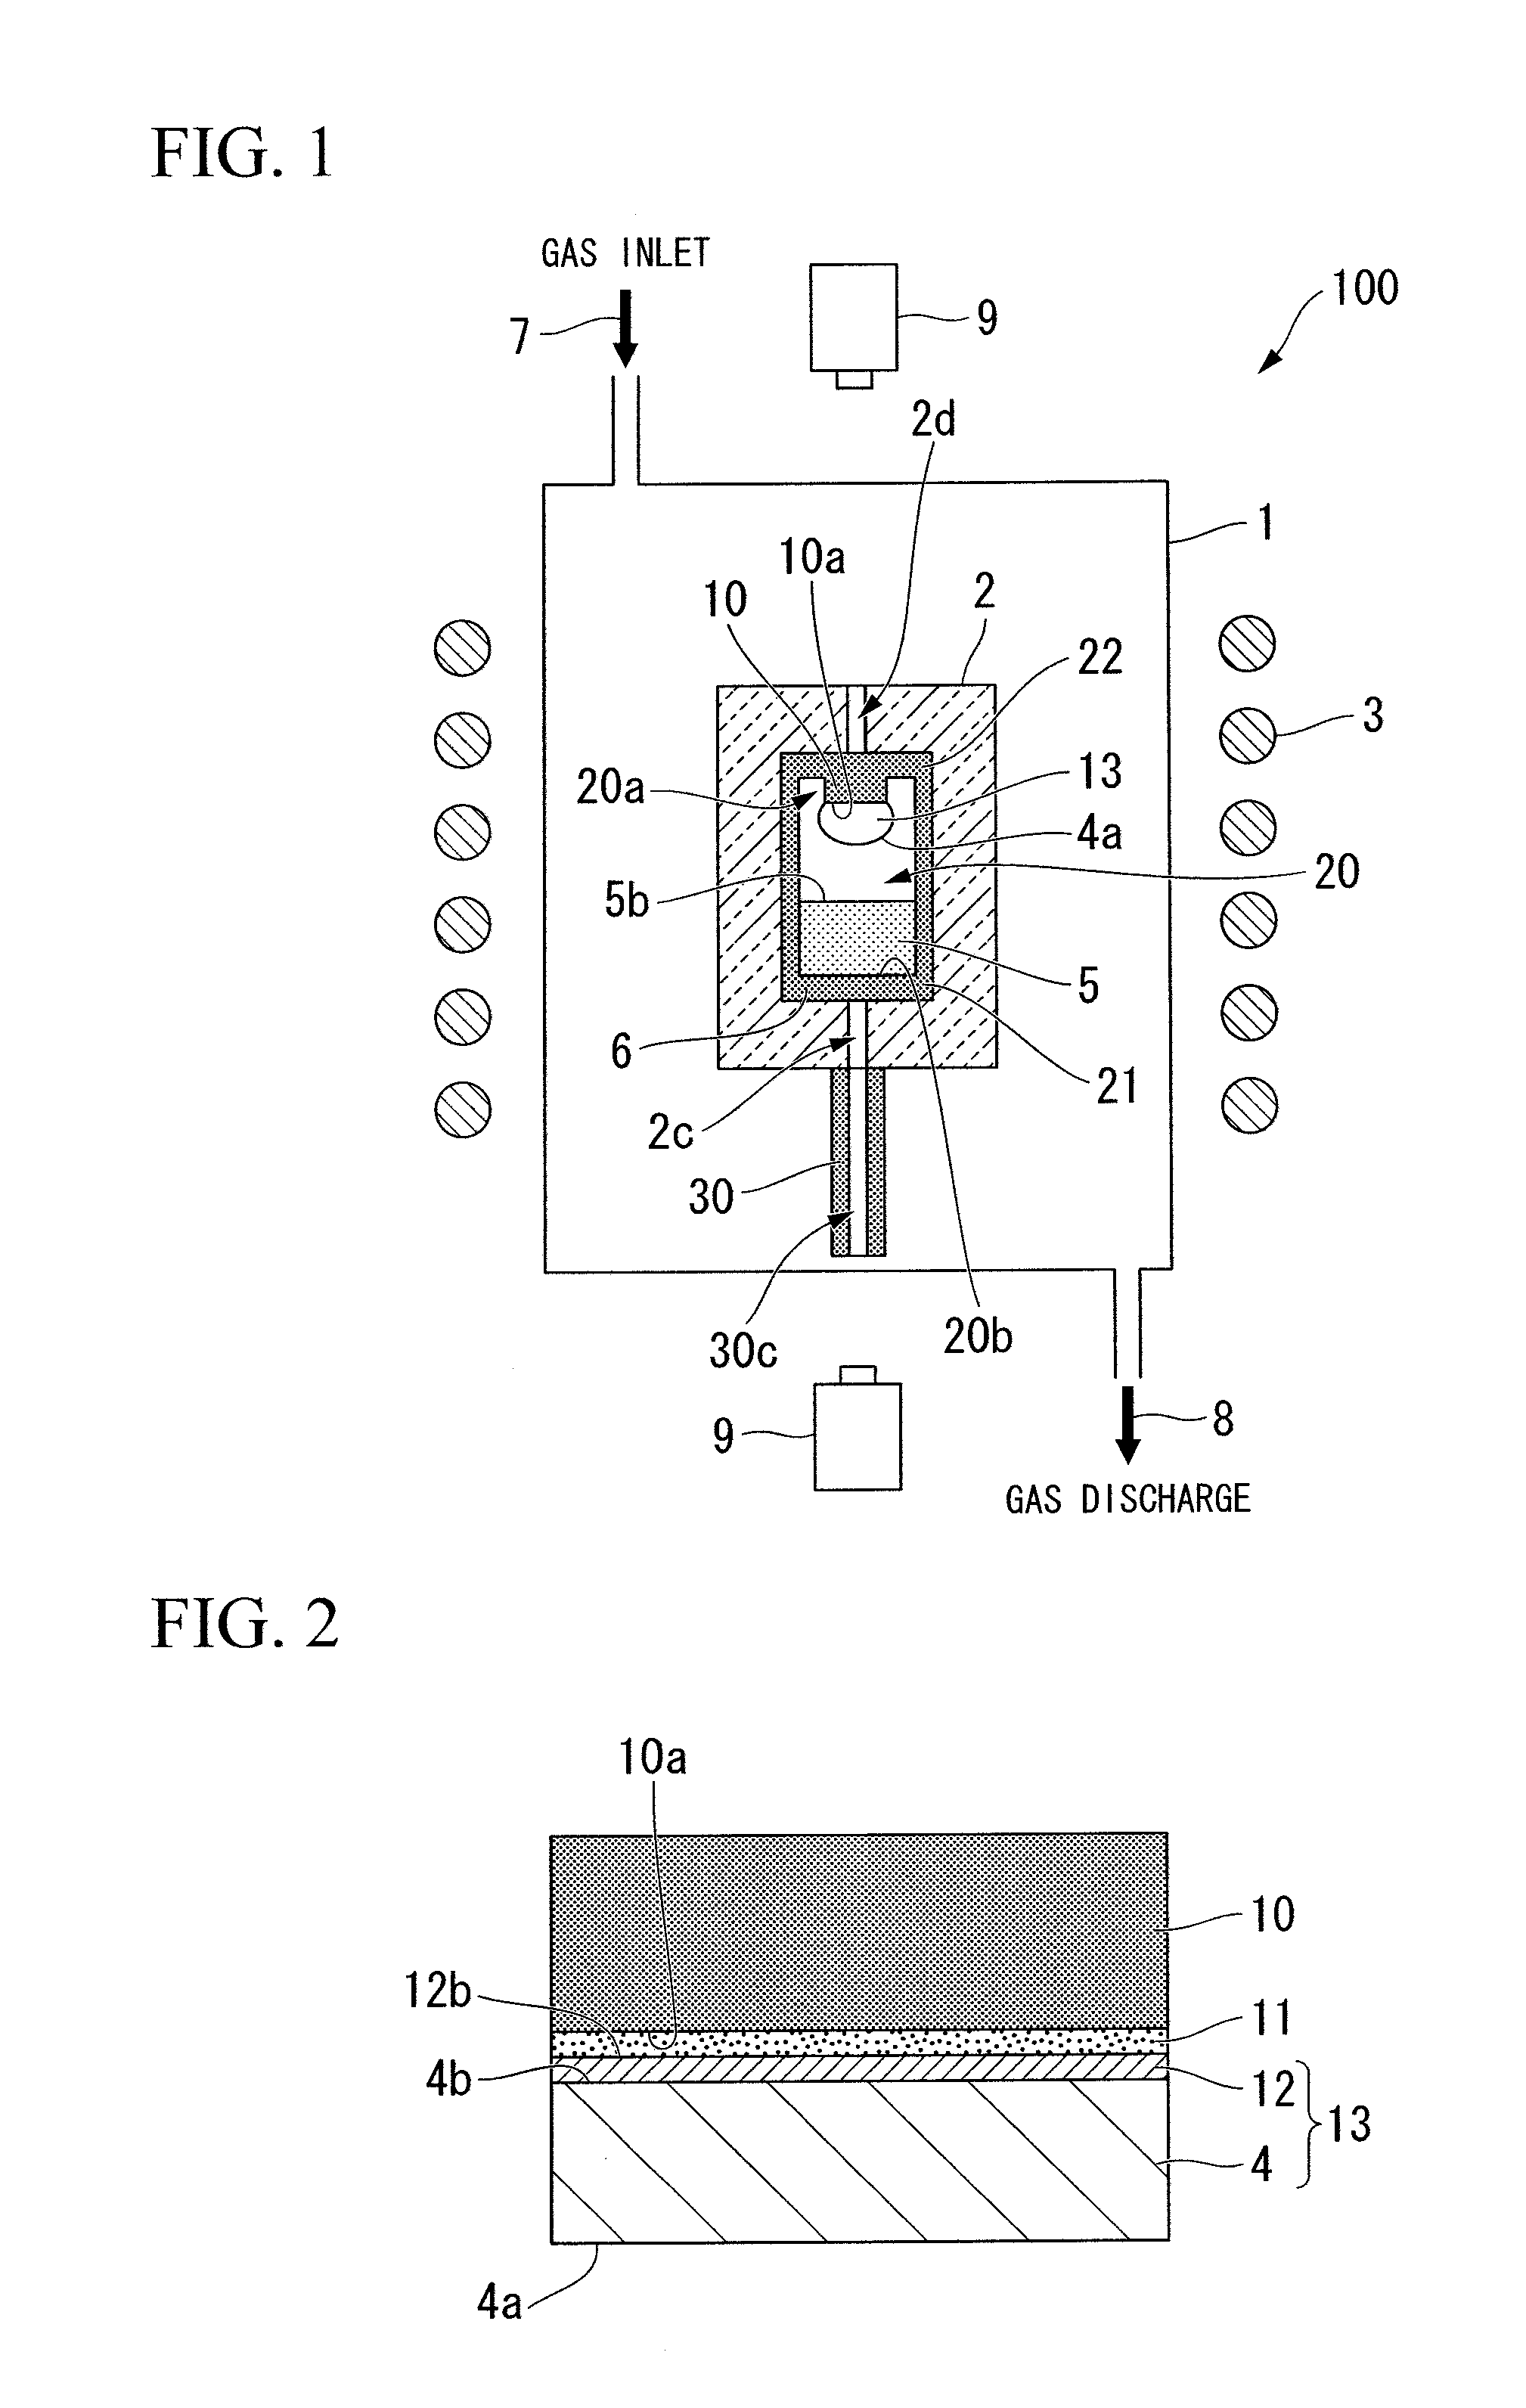 Seed crystal for silicon carbide single crystal growth, method for producing the seed crystal, silicon carbide single crystal, and method for producing the single crystal